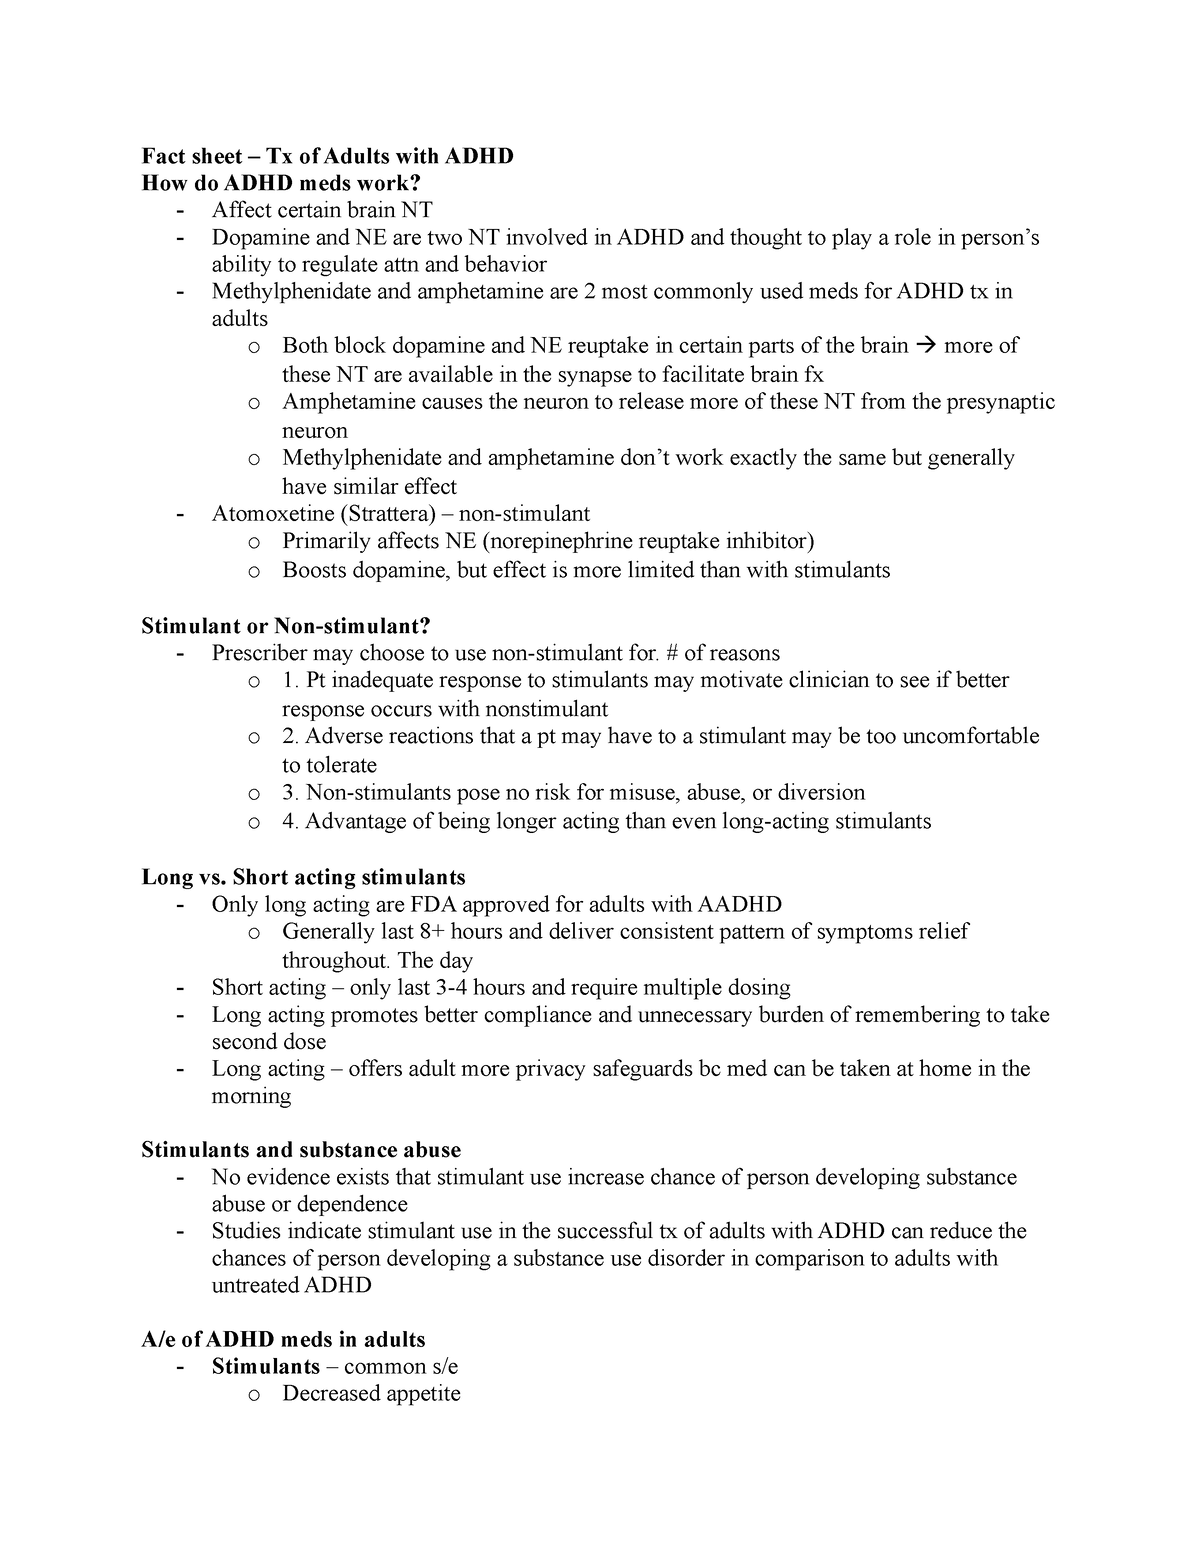 adhd-in-adults-fact-sheet-tx-of-adults-with-adhd-how-do-adhd-meds